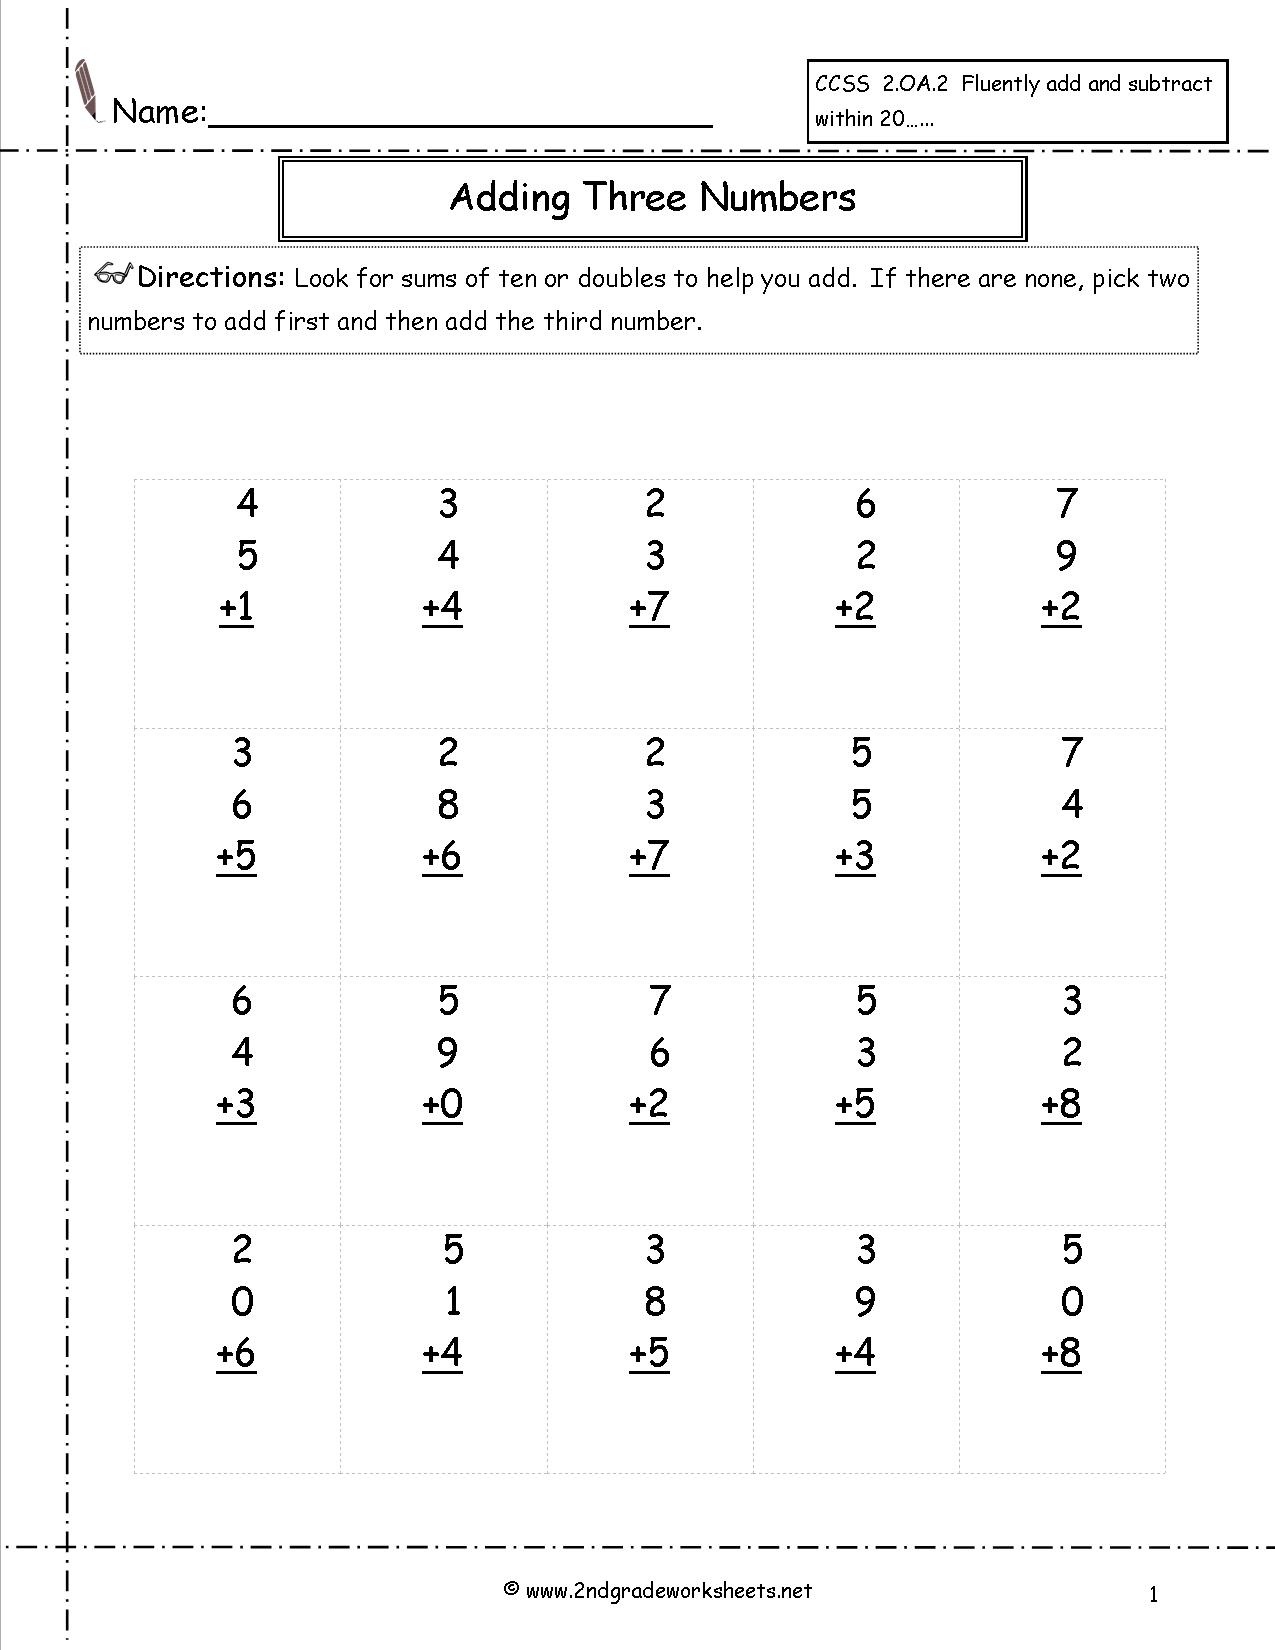 Free Math Worksheets And Printouts - Free Printable Math Worksheets Addition And Subtraction